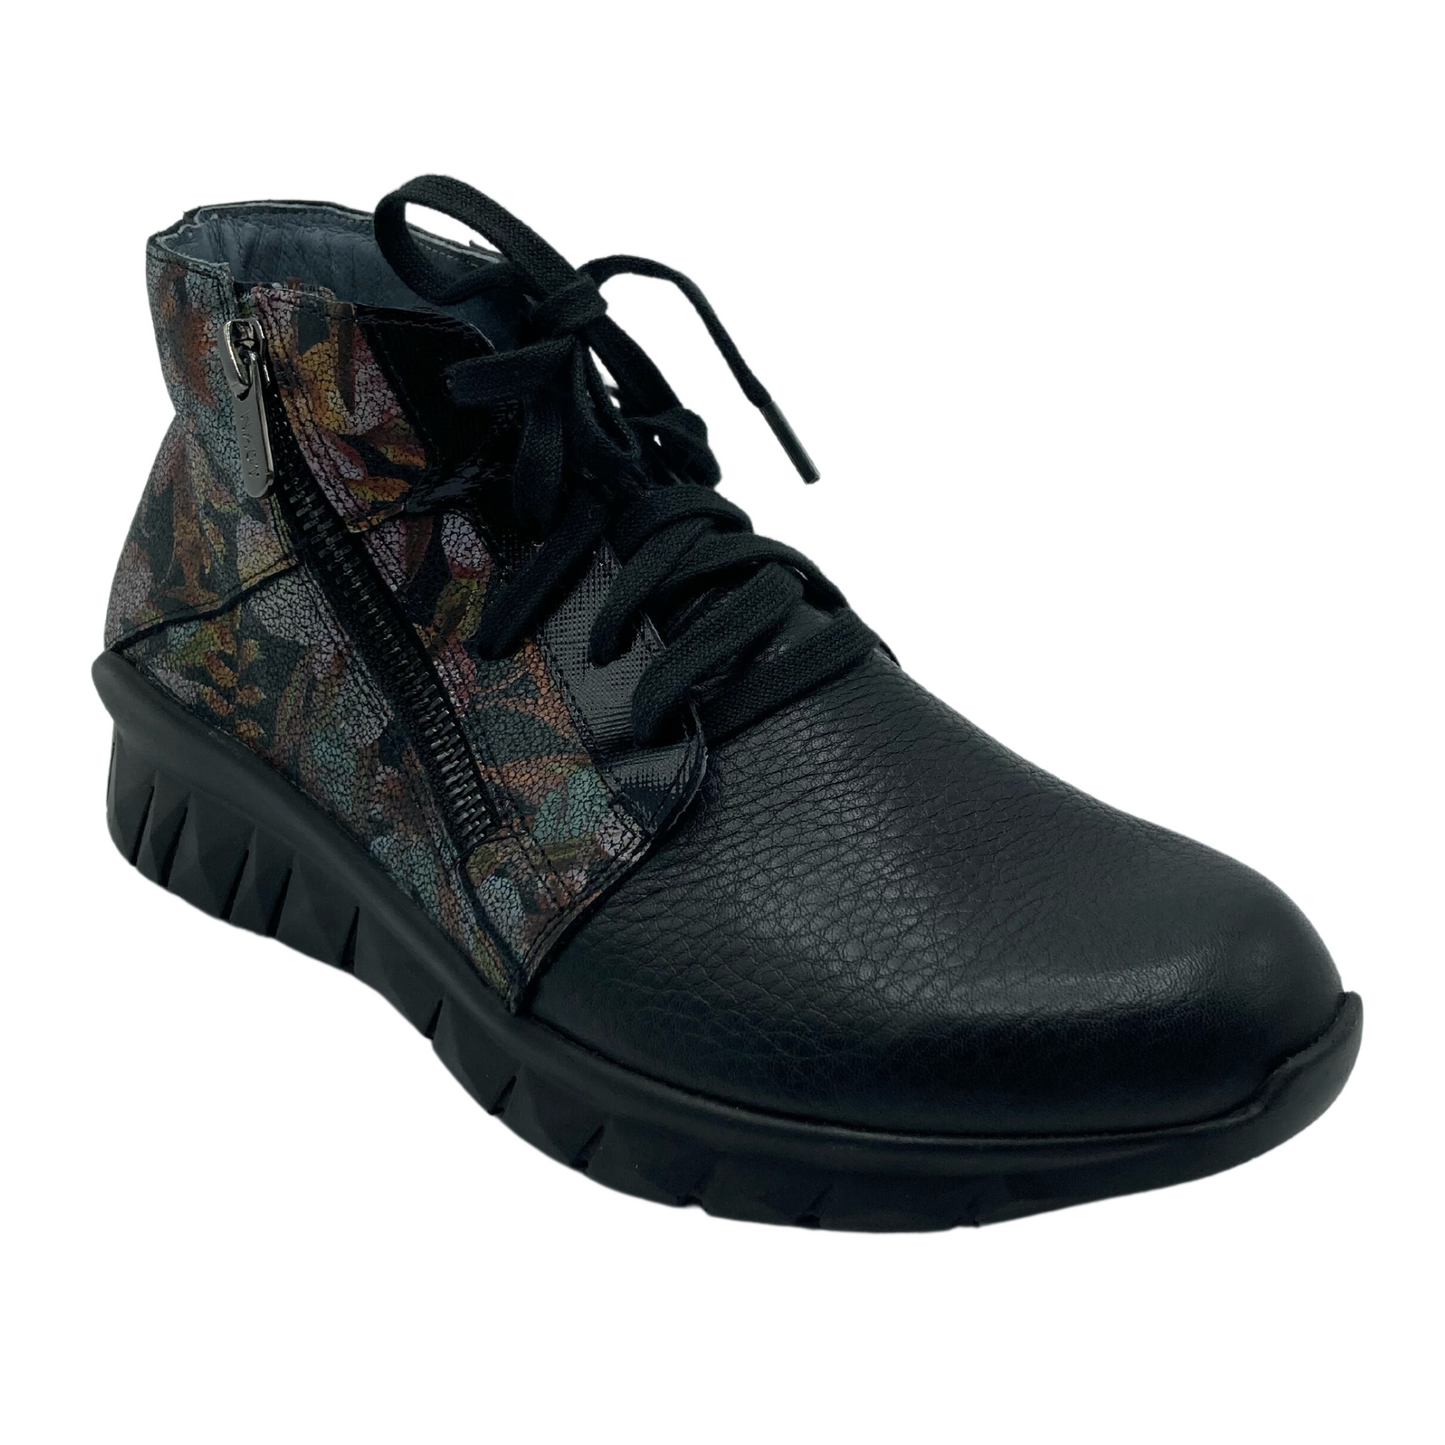 45 degree angled view of black and floral sneaker with black slip resistant outsole and black laces